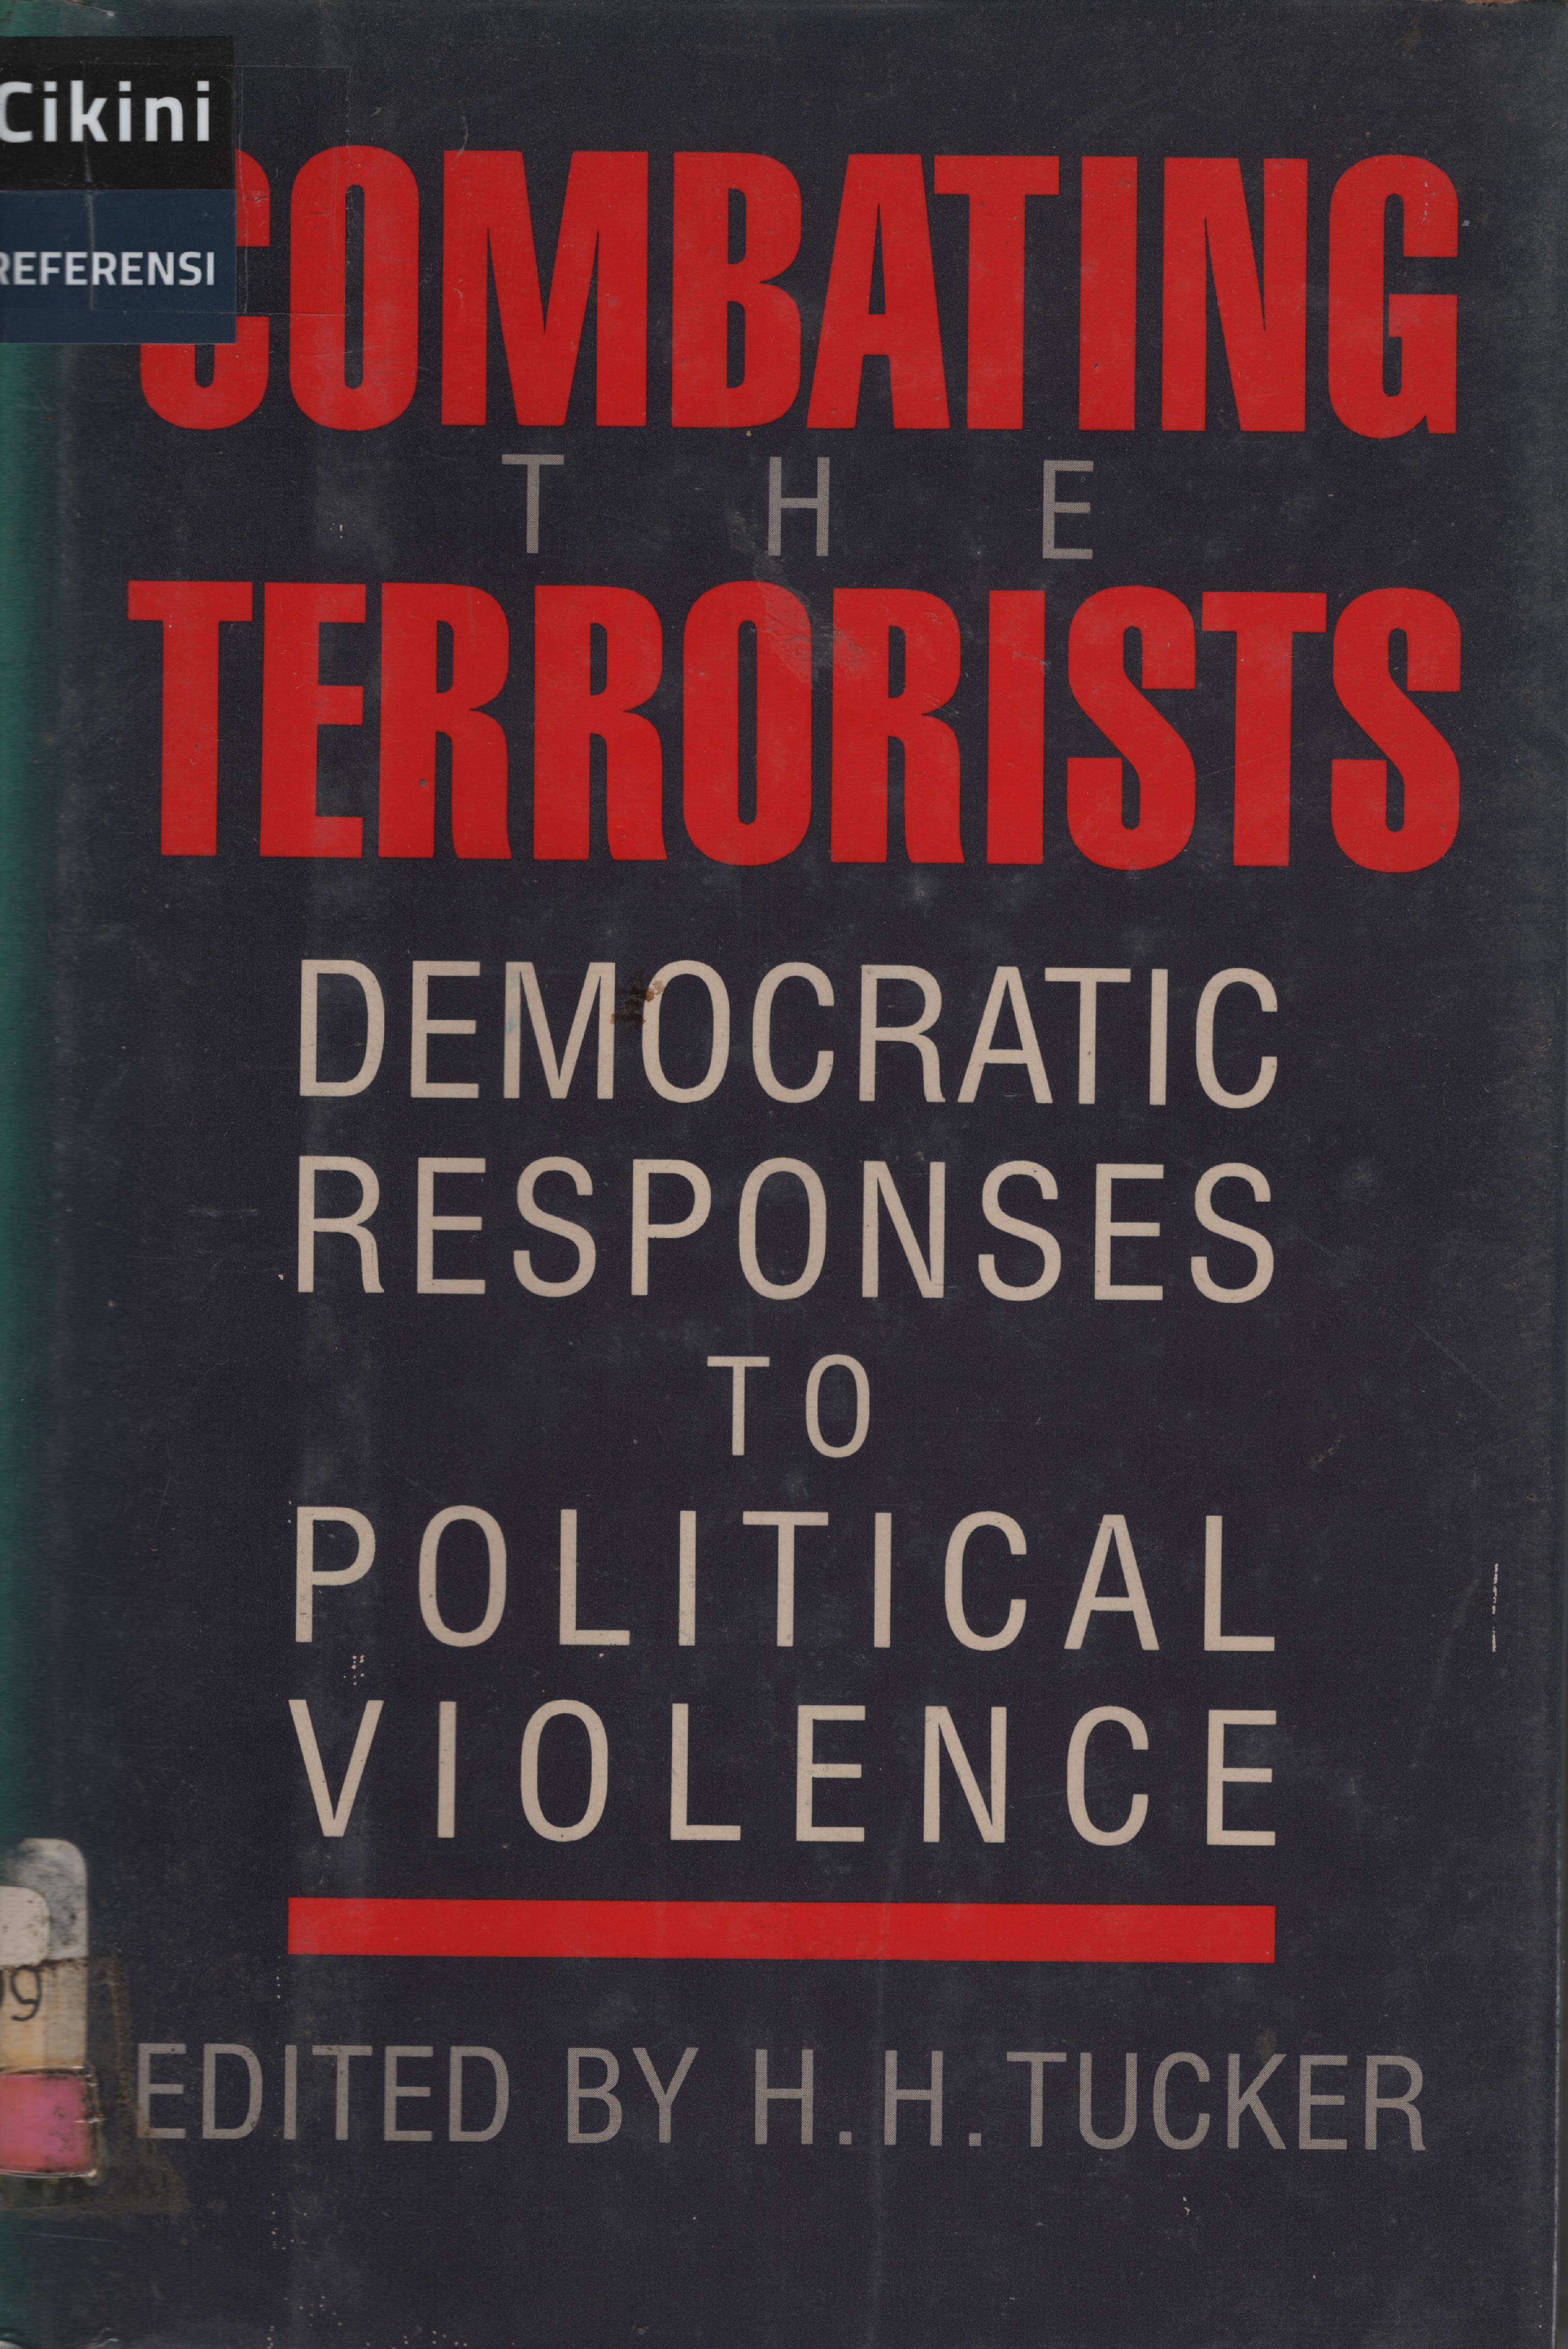 Combating th terrorists :  Democratic responses to political violence